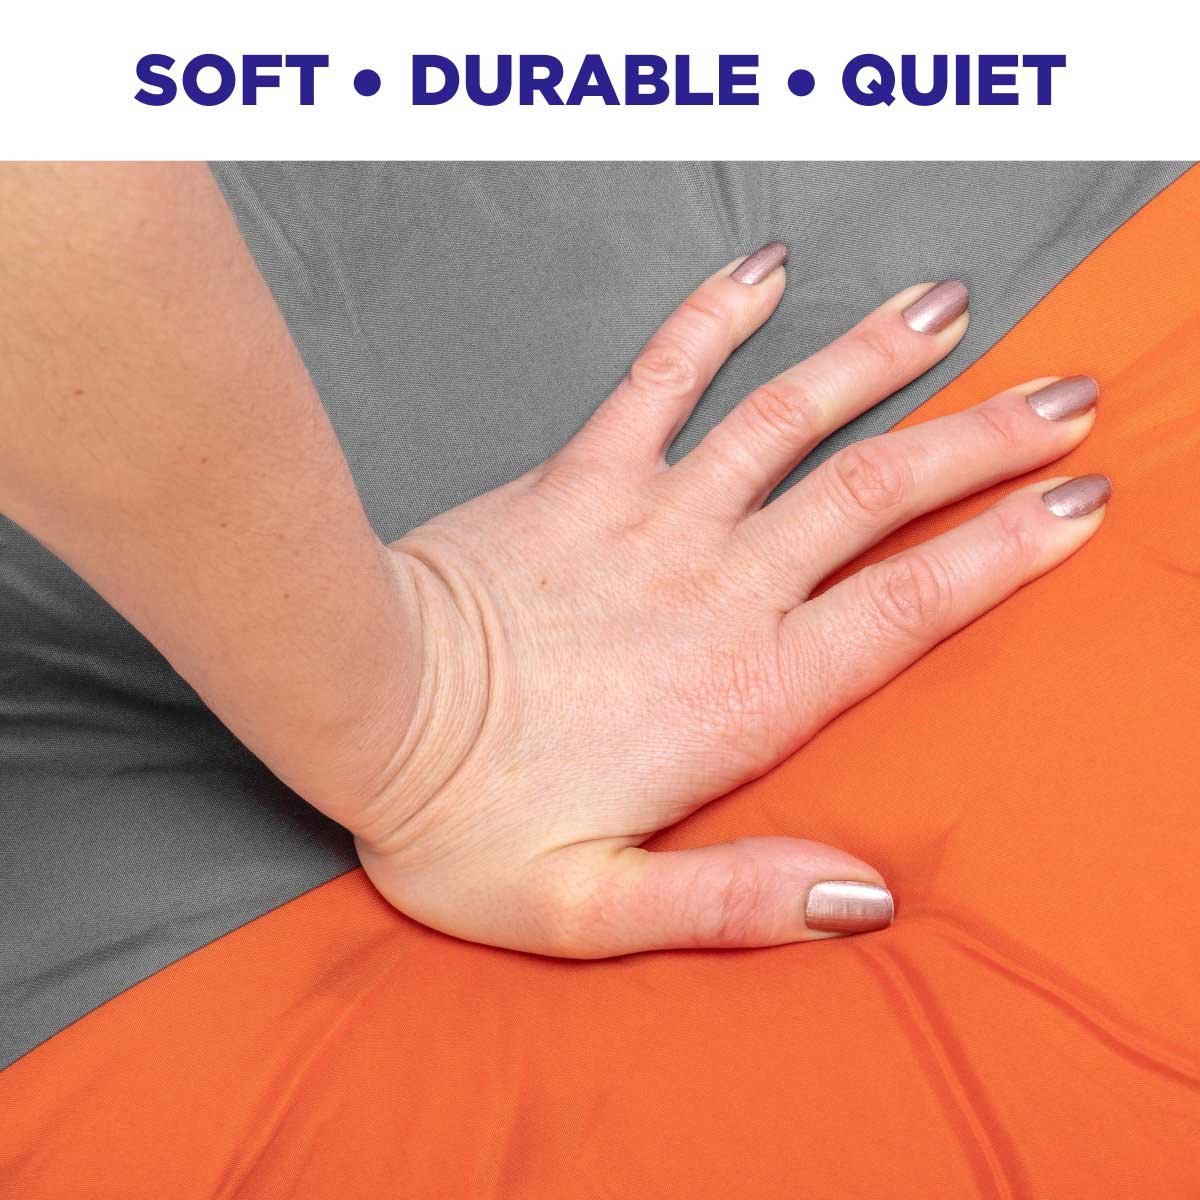 Orange Self Inflating Sleeping Pad is very soft and durable